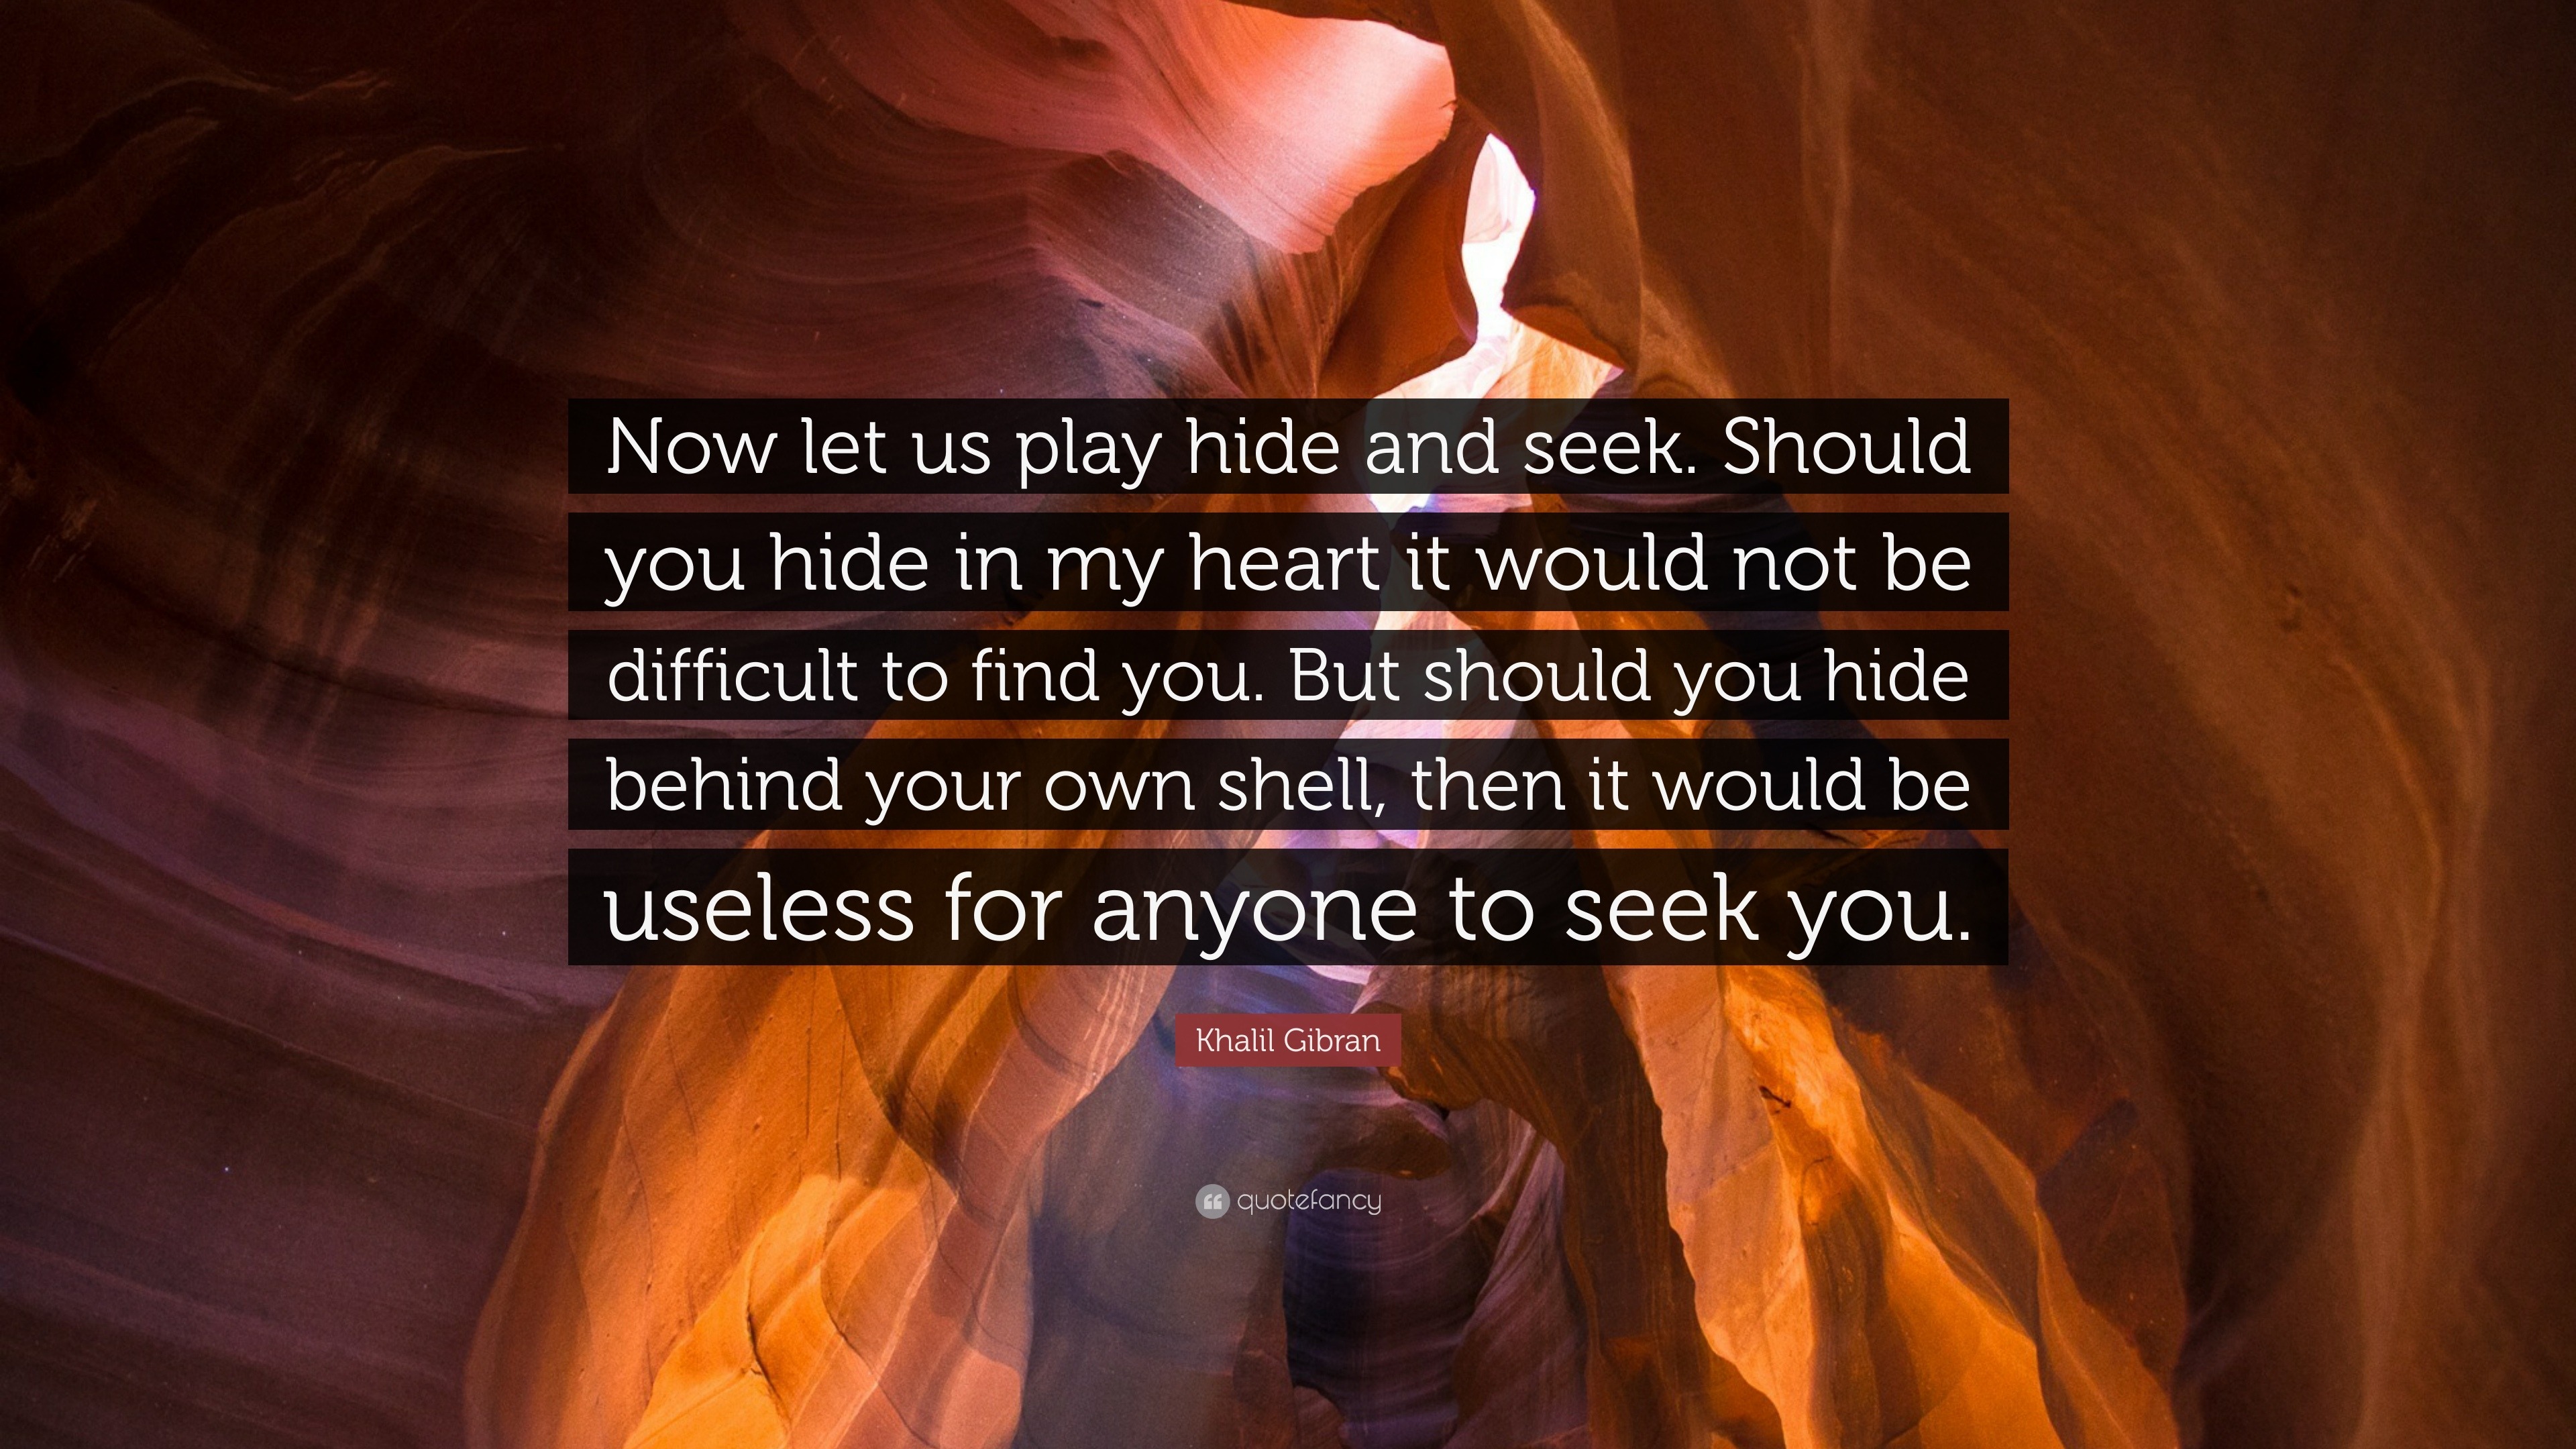 Khalil Gibran Quote Now Let Us Play Hide And Seek Should You Hide In My Heart It Would Not Be Difficult To Find You But Should You Hide Be